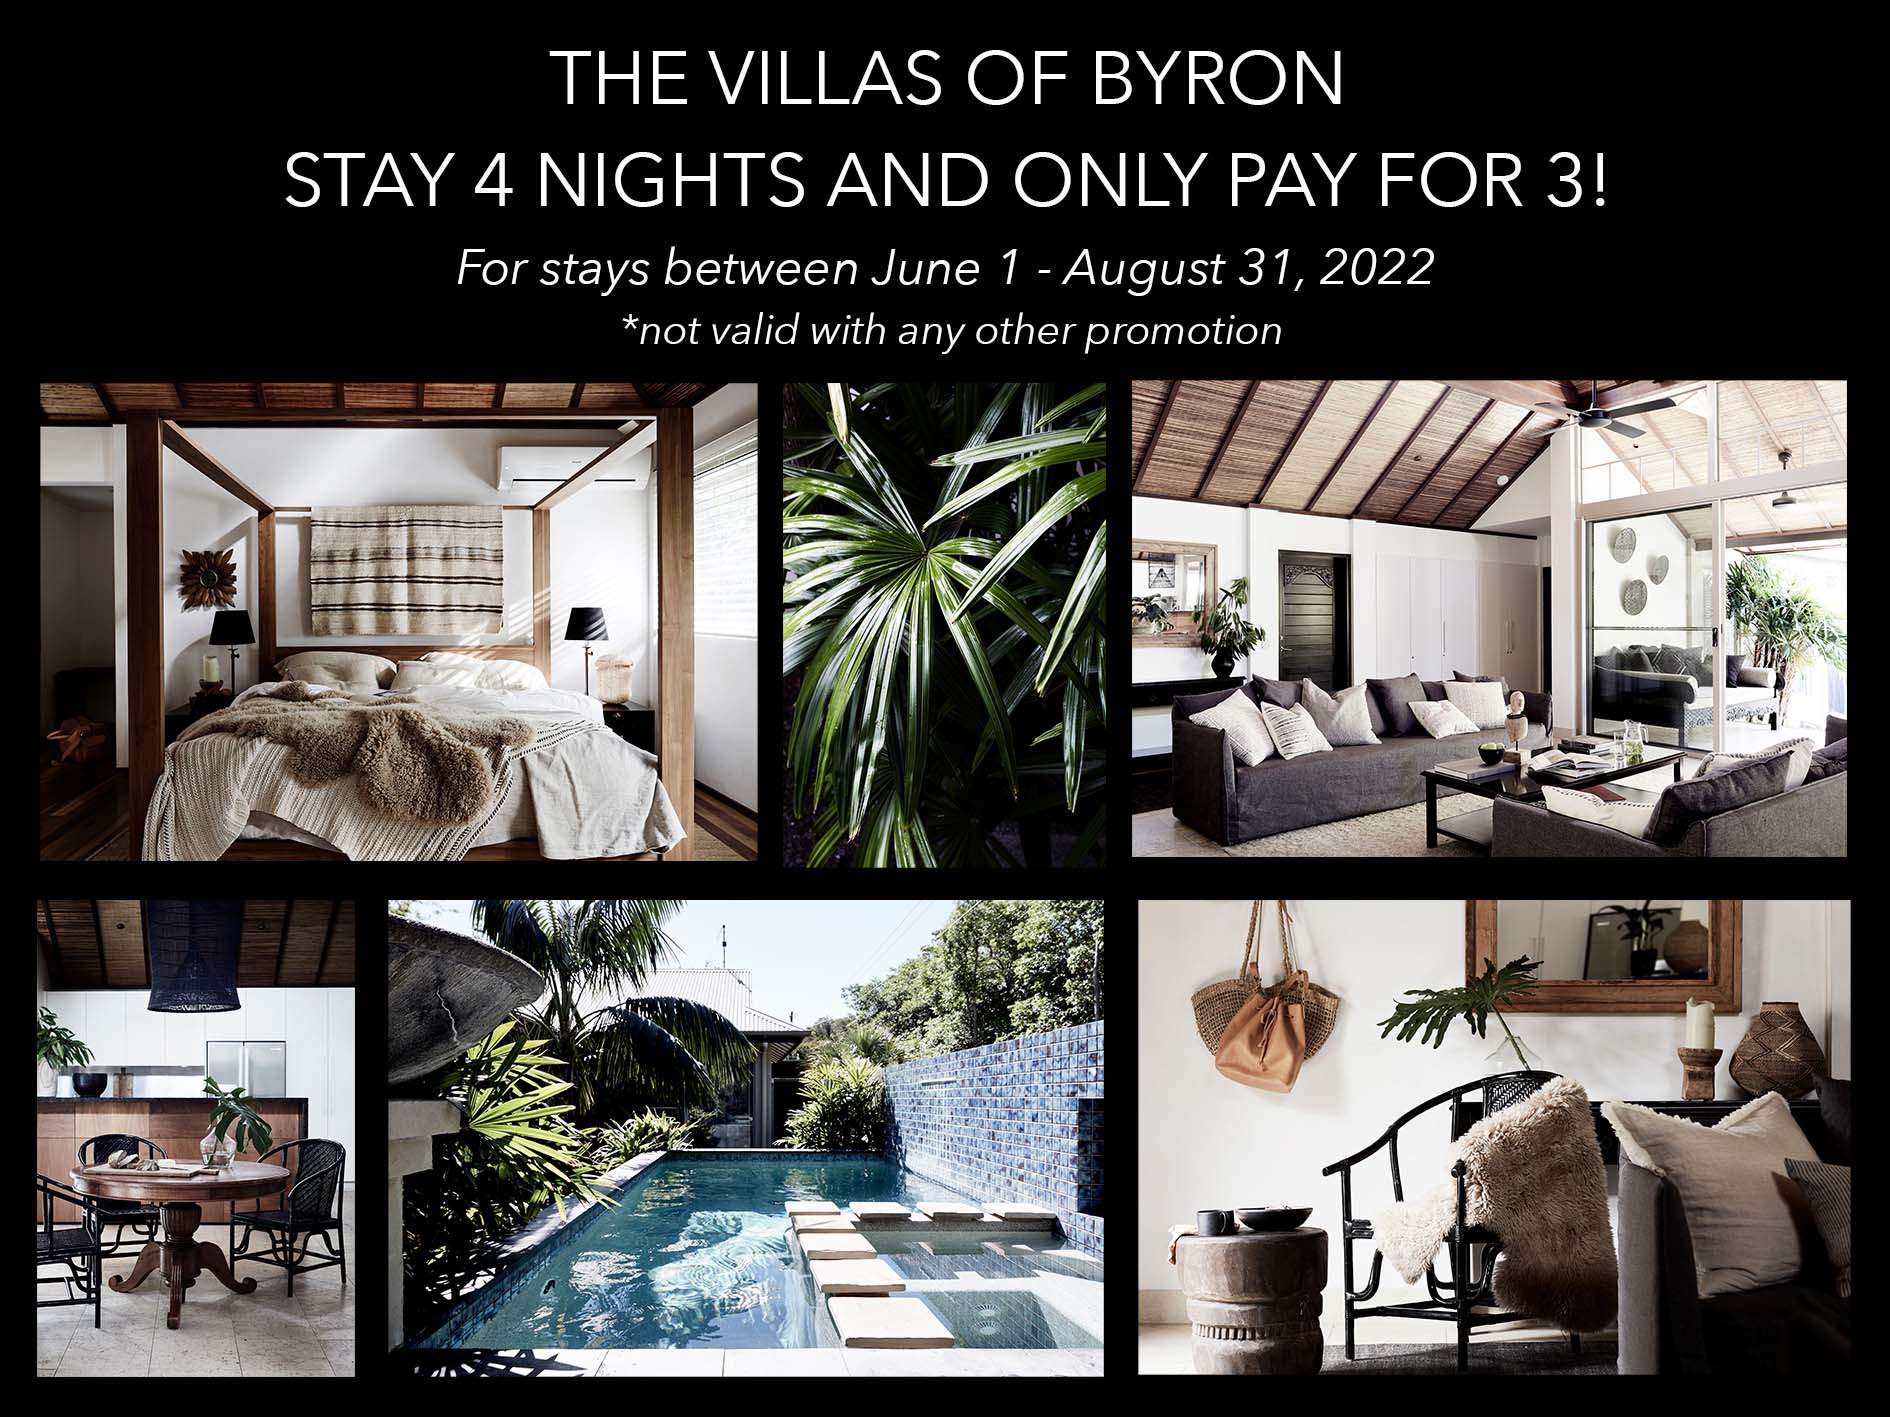 The Villas of Byron winter promotion 2022